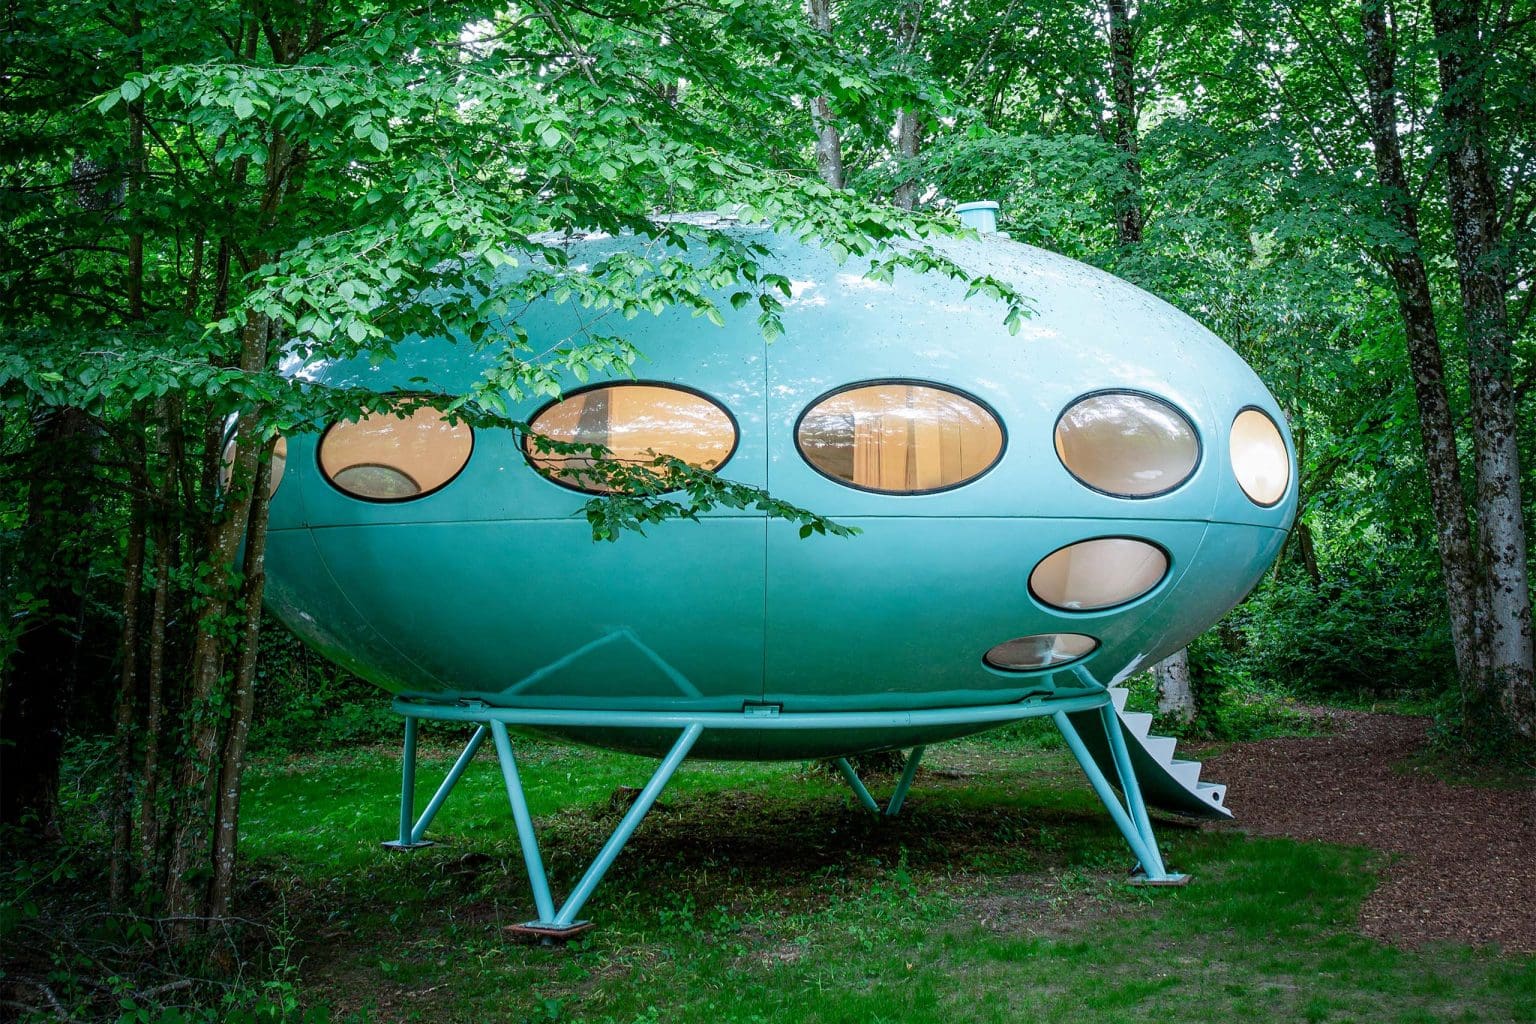 Holidays rentals adapting for digital nomads | A UFO-like structure with a rounded shape and oval windows sits in a wooded glade